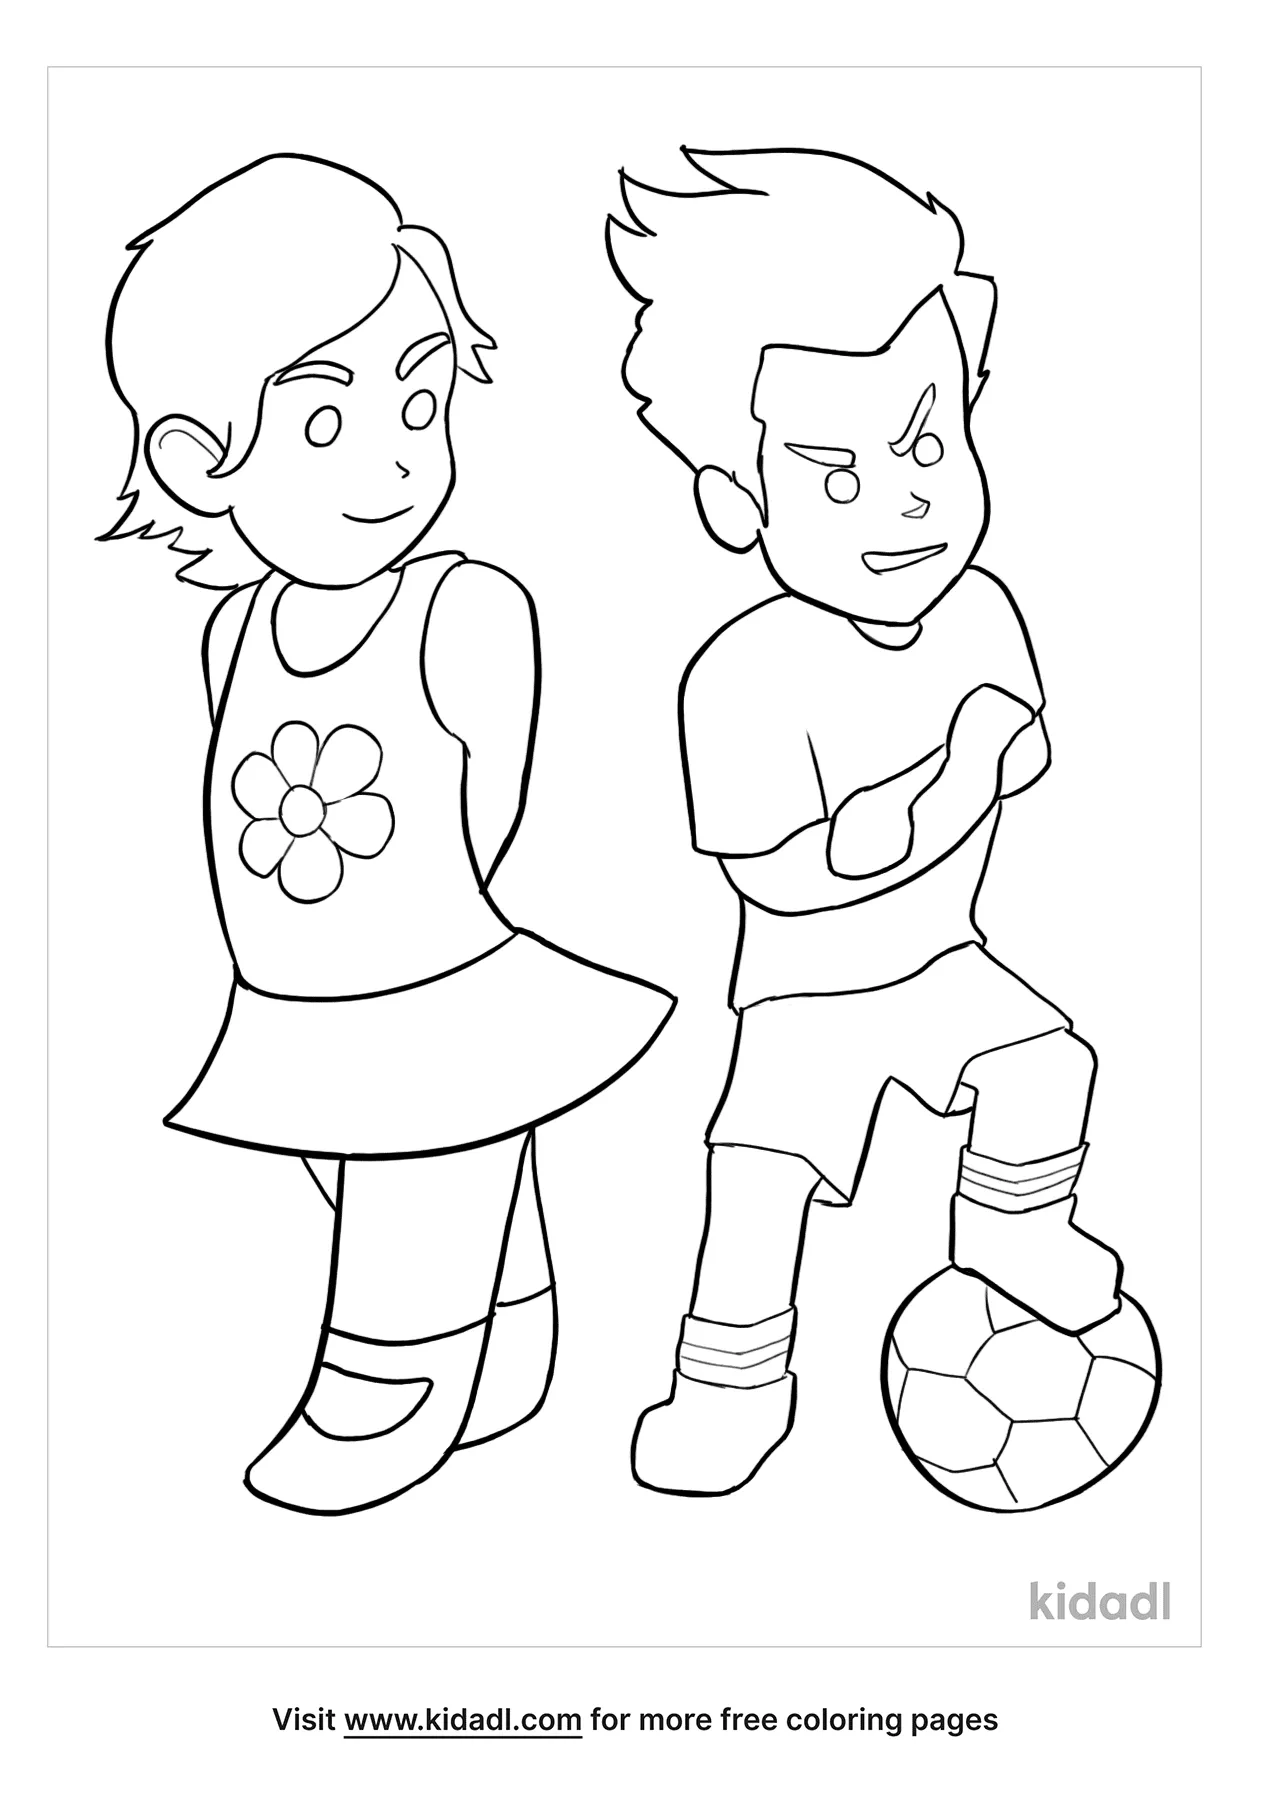 Boy And Girl Coloring Pages   Free People and celebrities Coloring ...